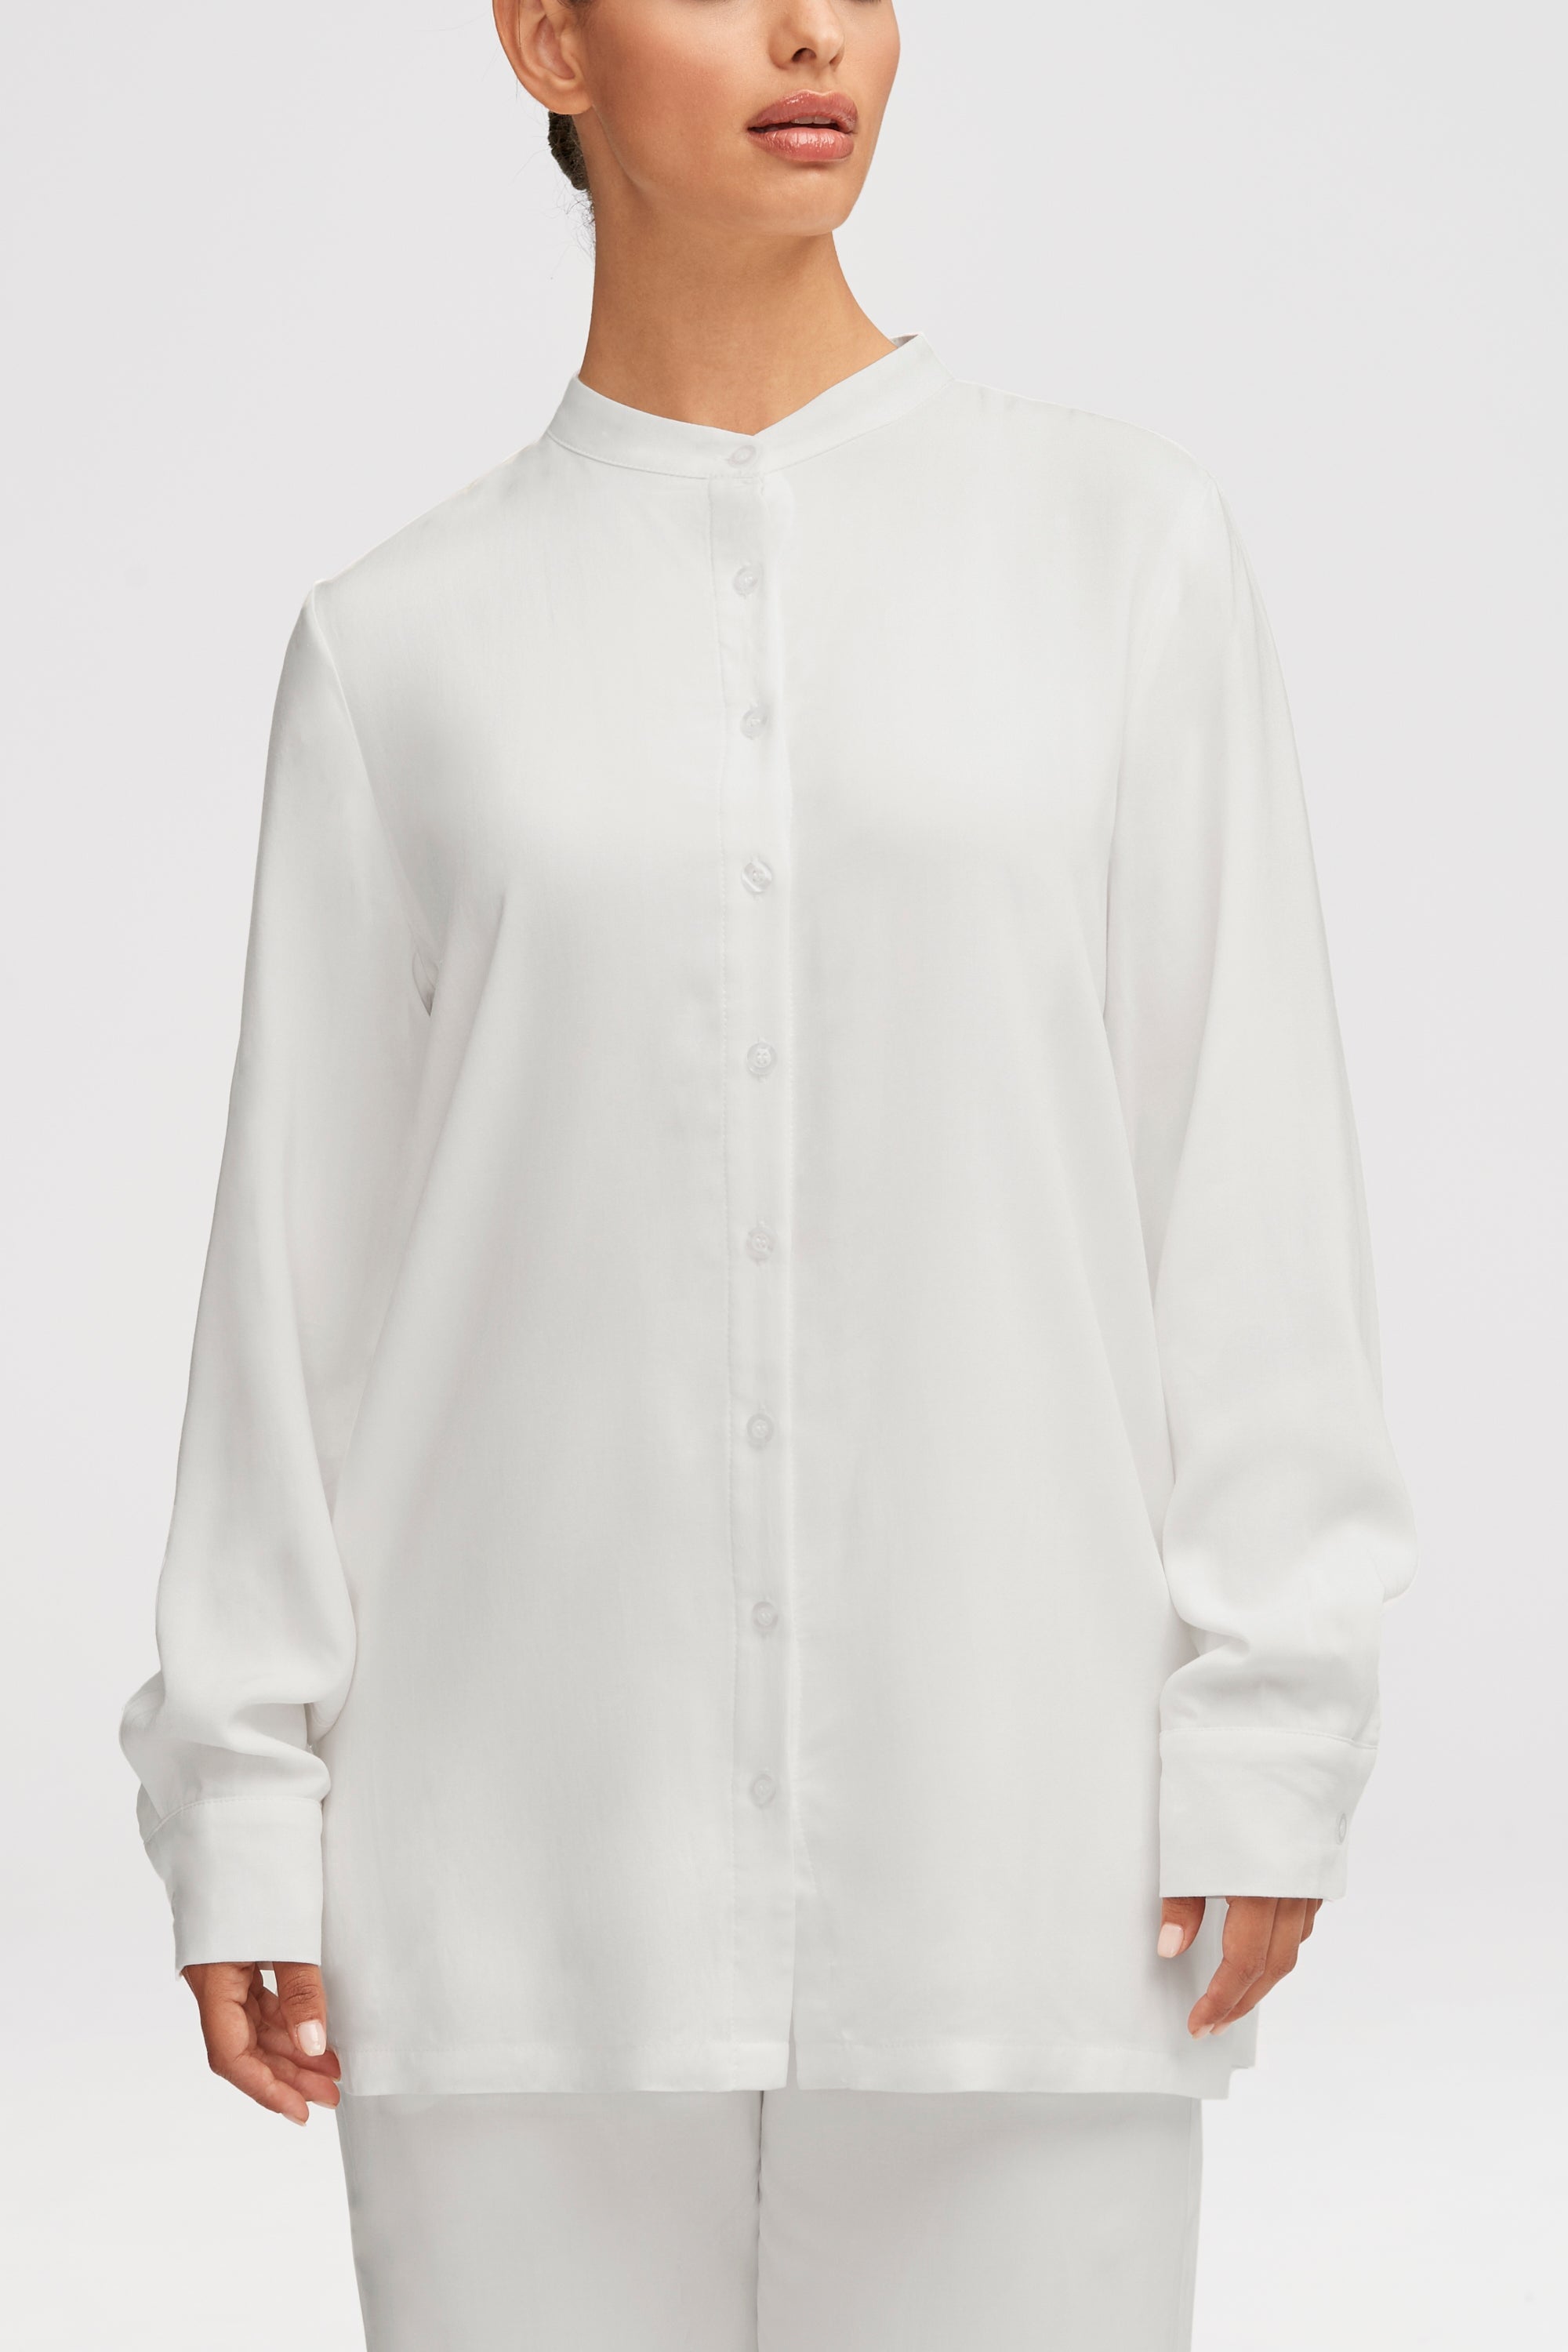 Alina Button Down Side Slit Top - White Clothing Veiled 